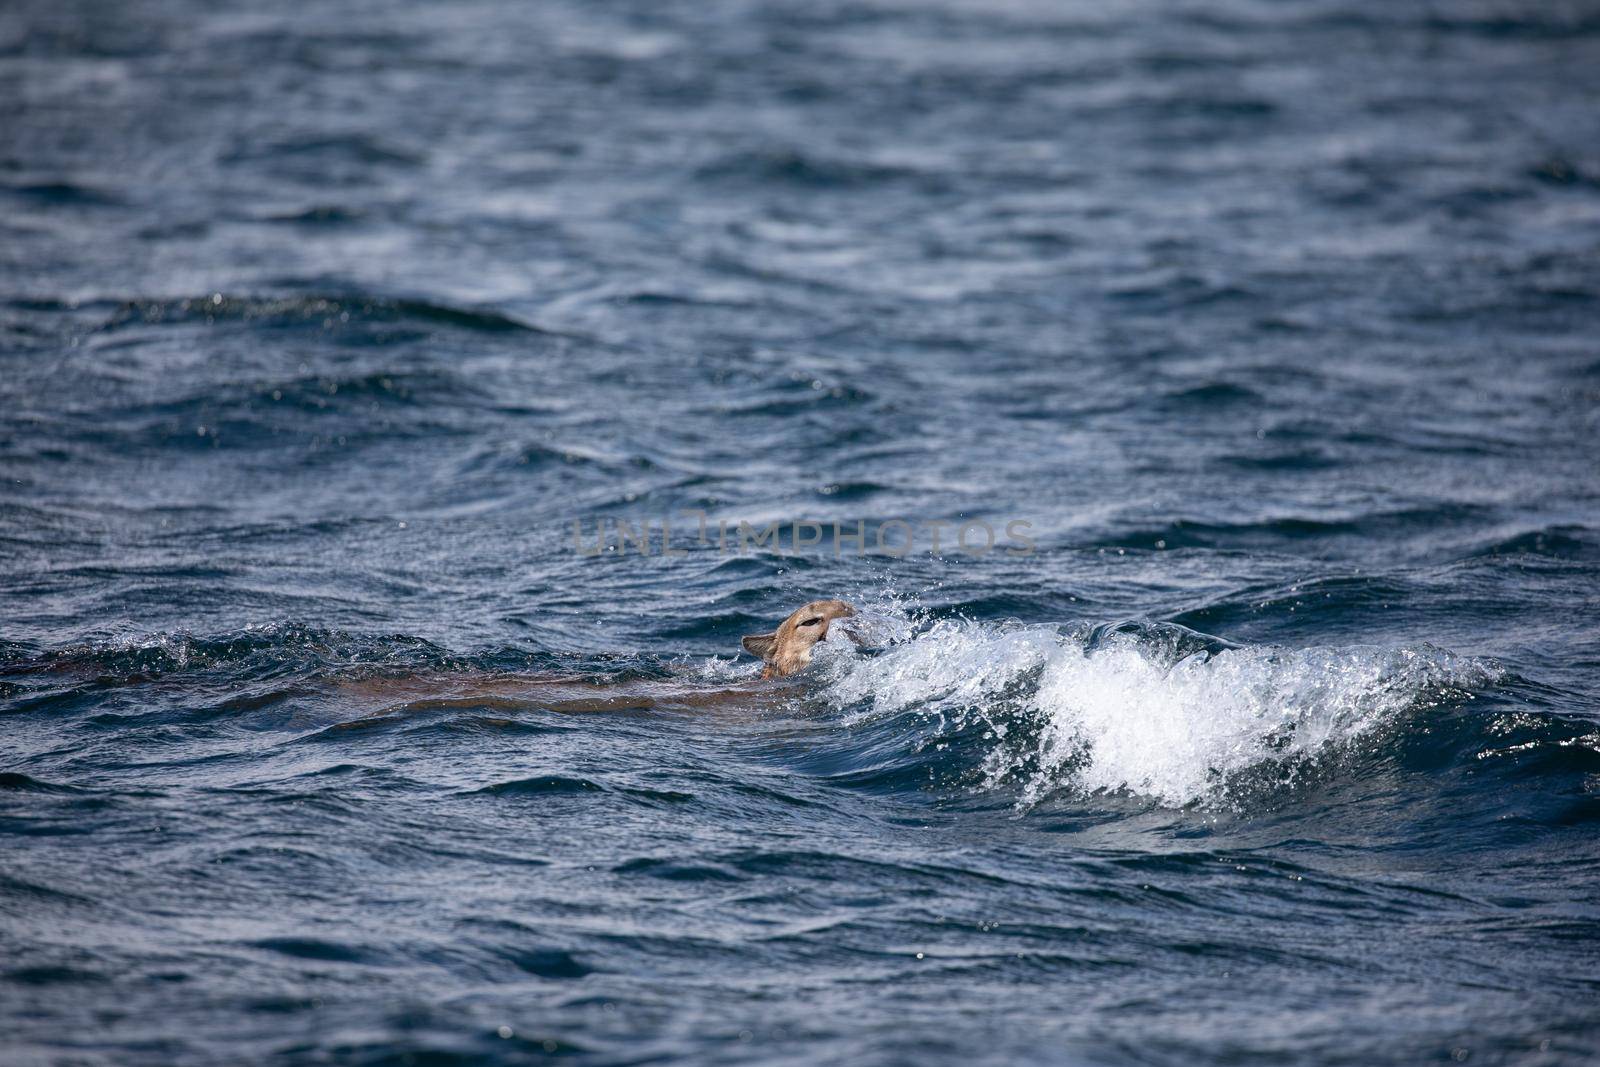 Cougar or mountain lion found swimming across Chancellor Channel and being hit by a wave before coming into Johnstone Strait in British Columbia waters